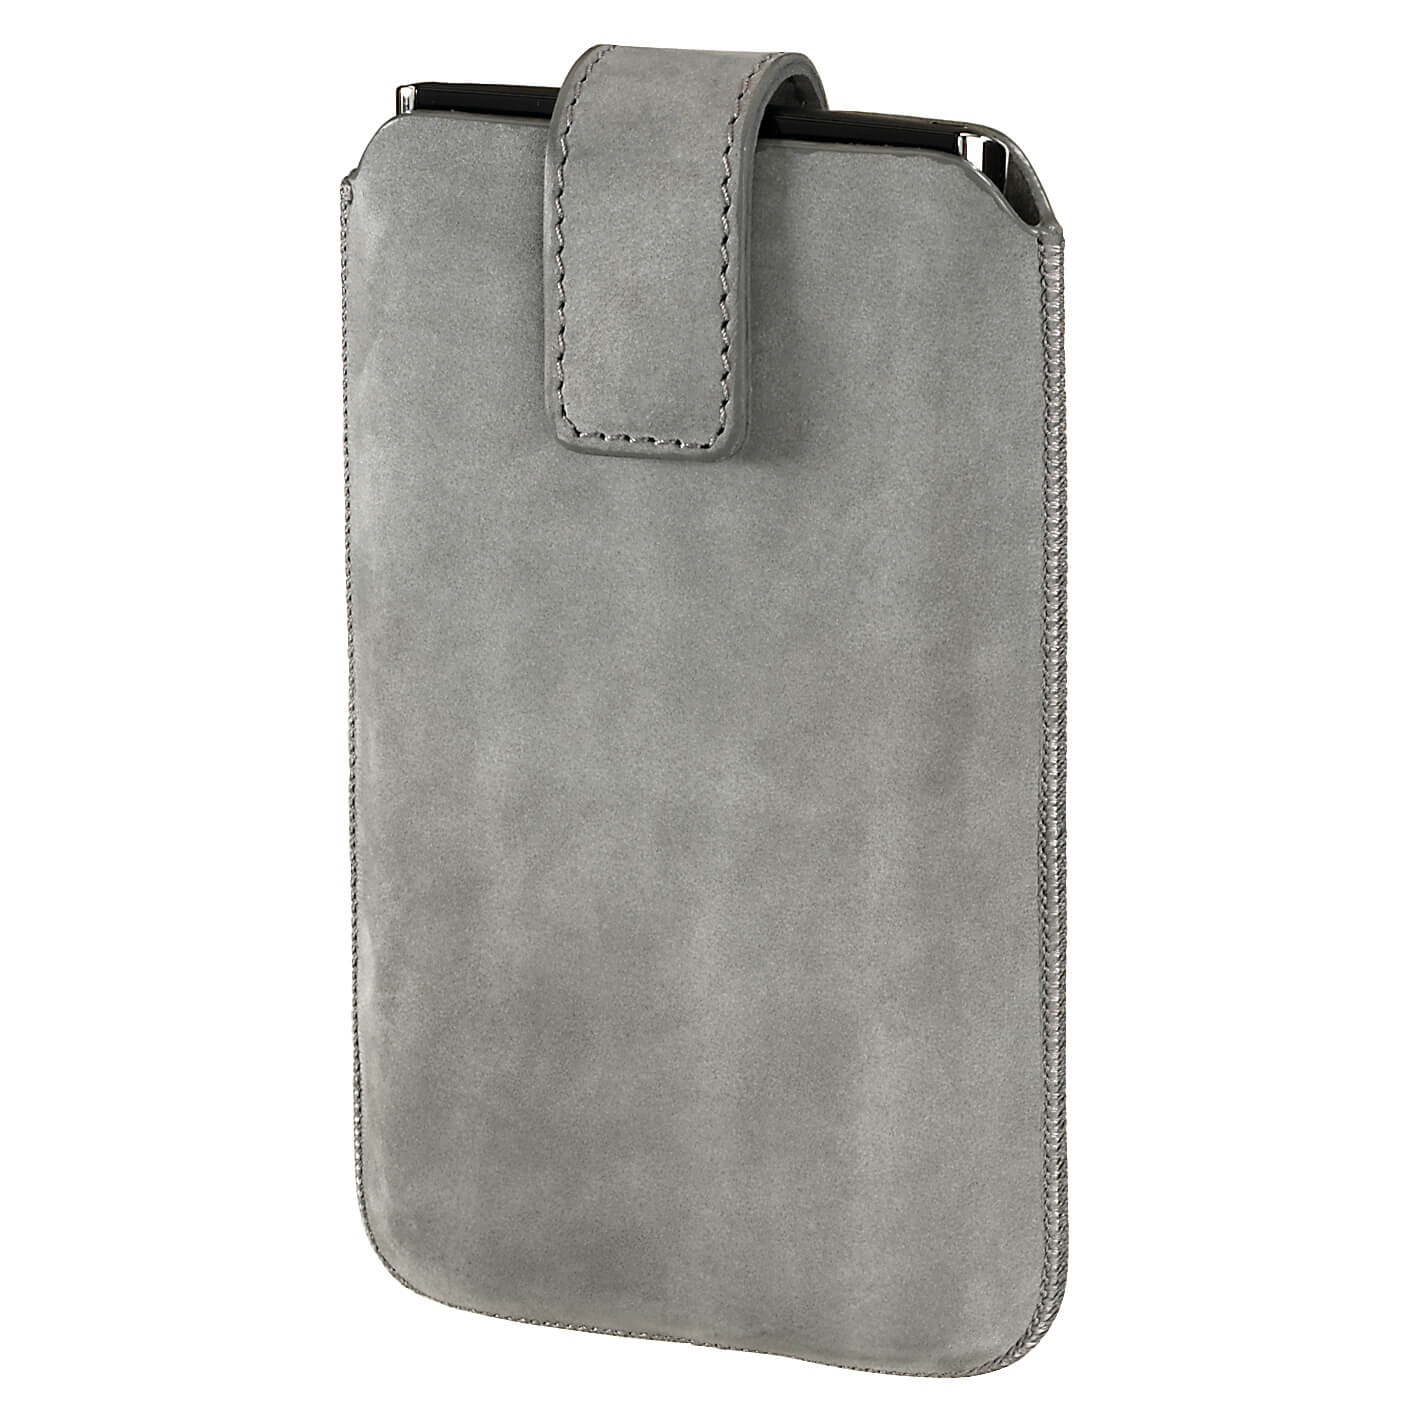 Chic Case Smartphone Sleeve, size L, grey